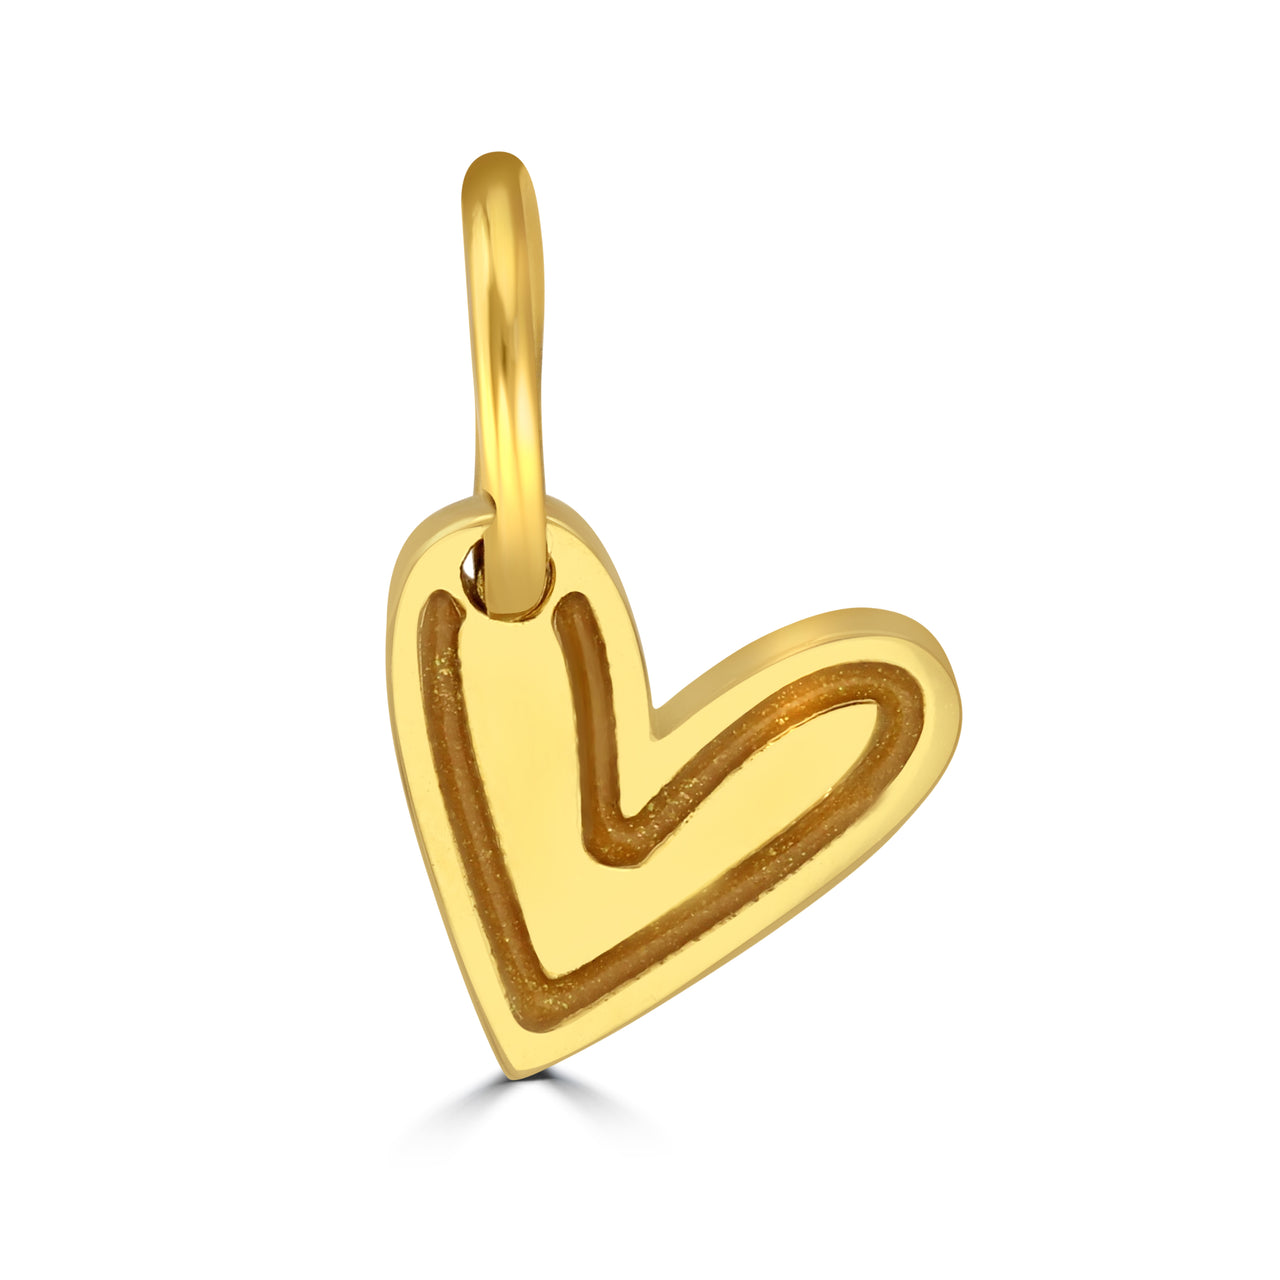 Gold heart charm with sparkly enamel